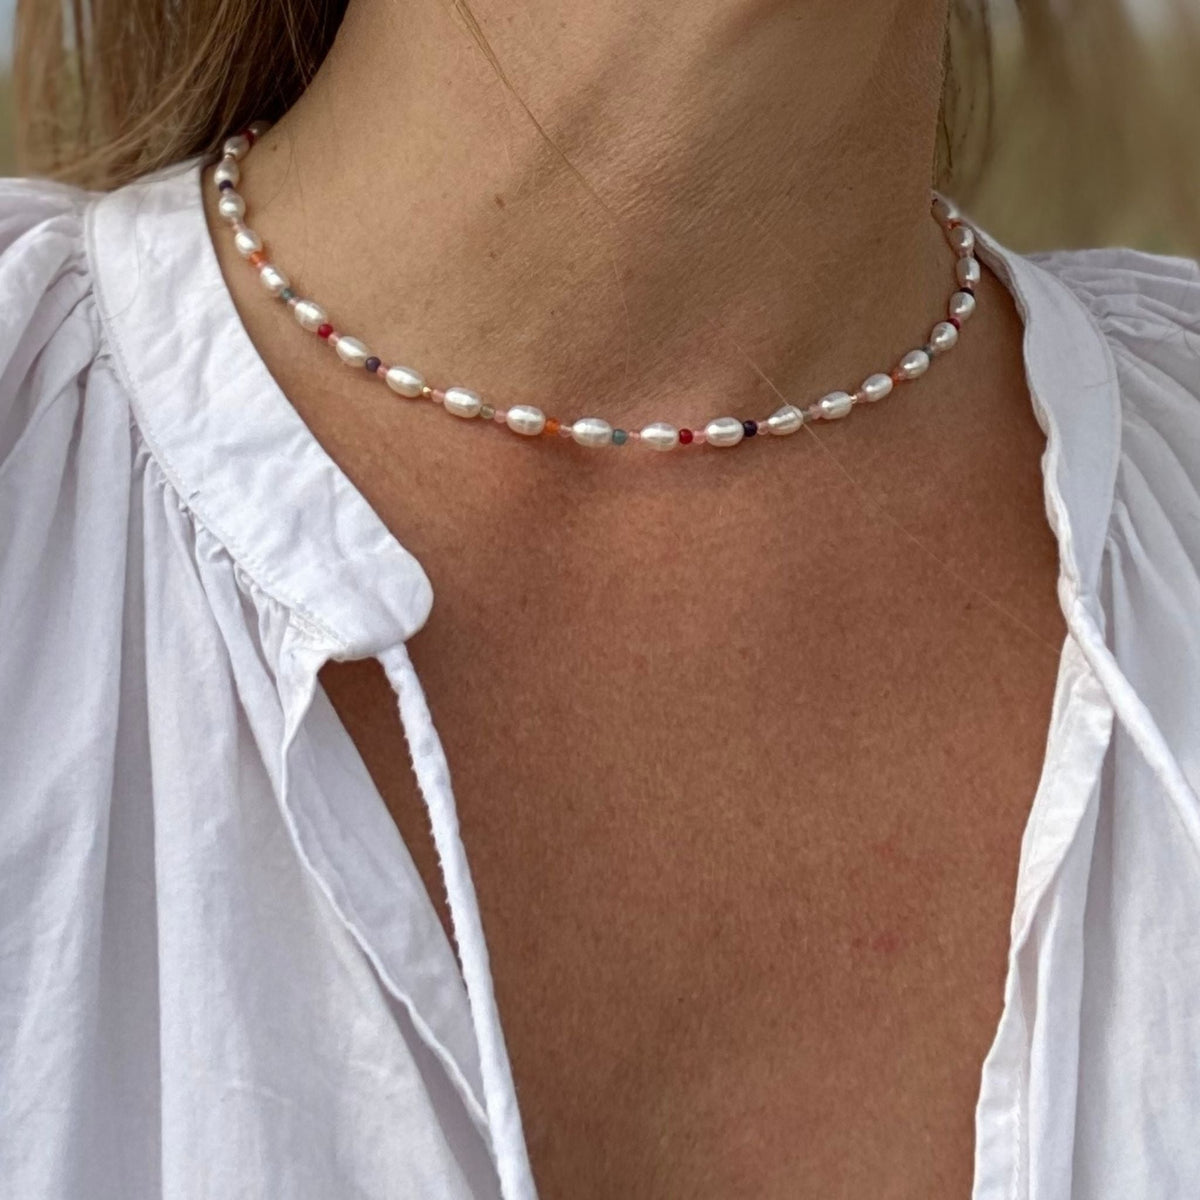 Boho Girly Necklace - White Freshwater Pearl Necklace with Gems